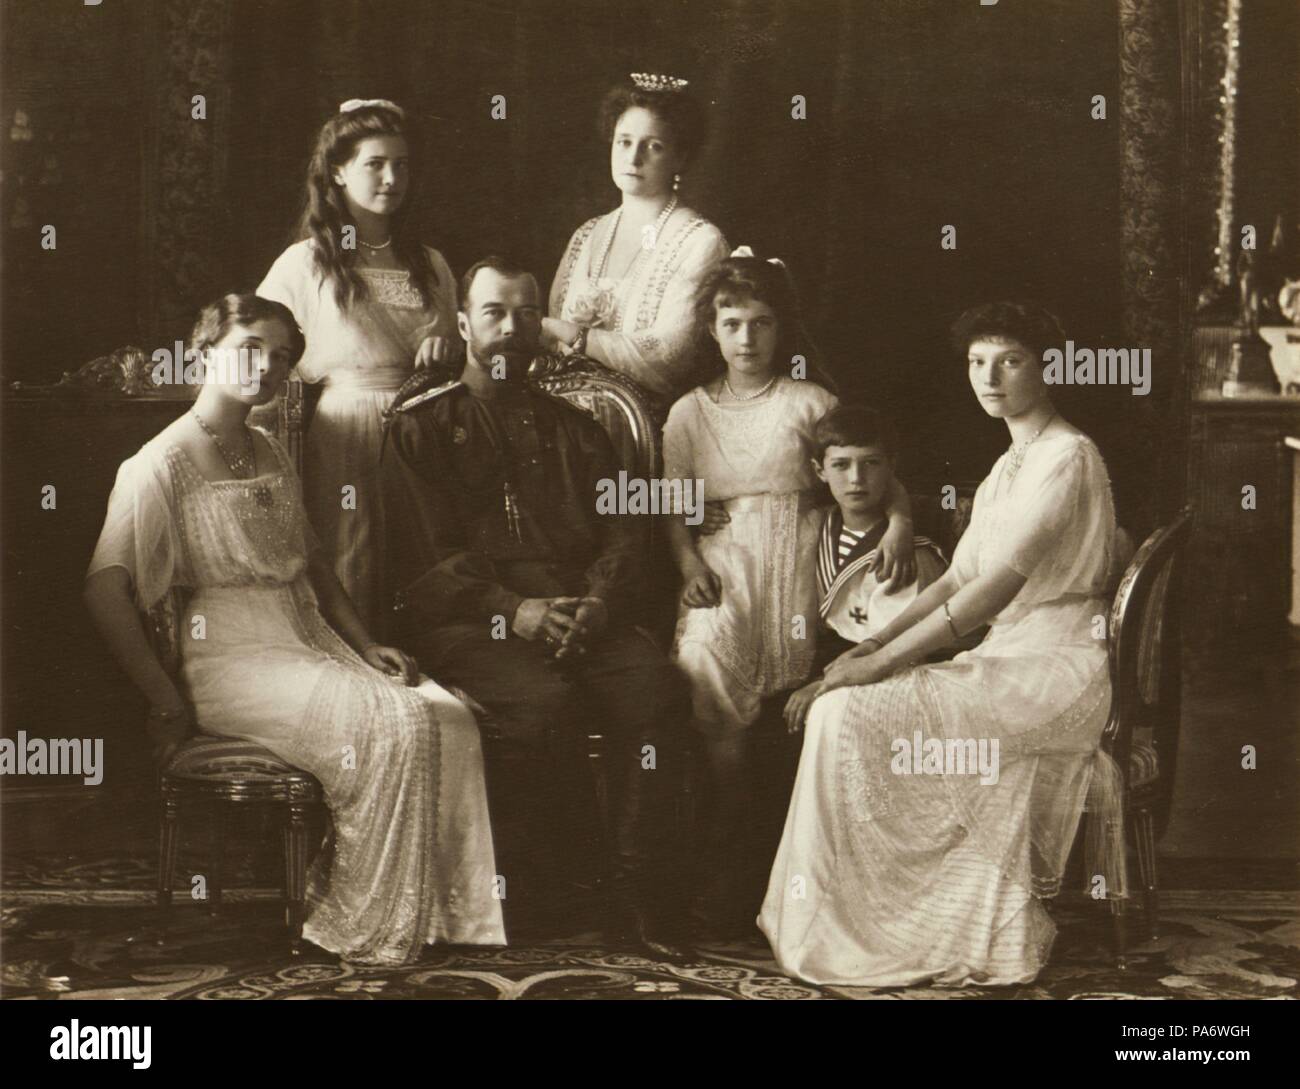 The Family of Tsar Nicholas II of Russia. Museum: State Archive of the Russian Federation (GARF). Stock Photo